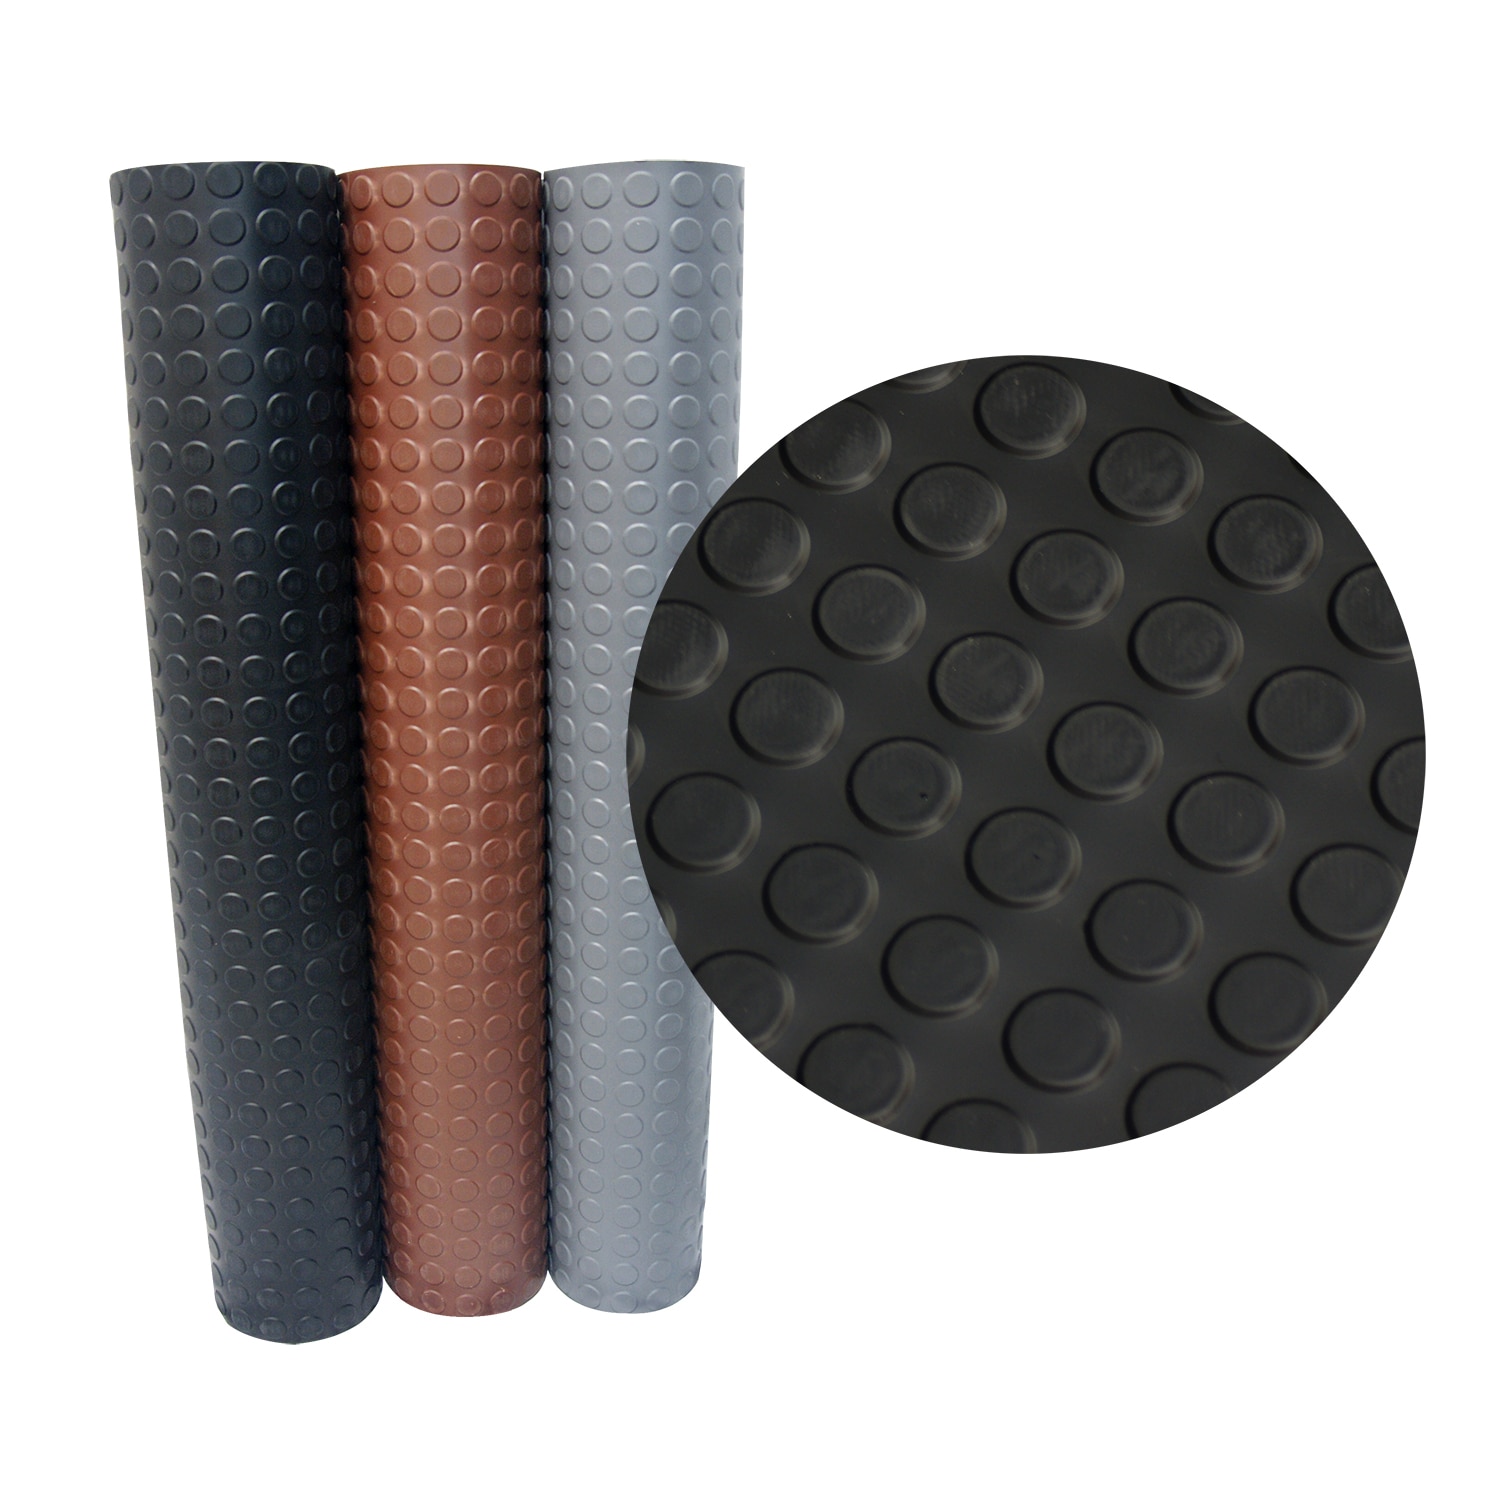 Rubber Roll Gym Flooring at